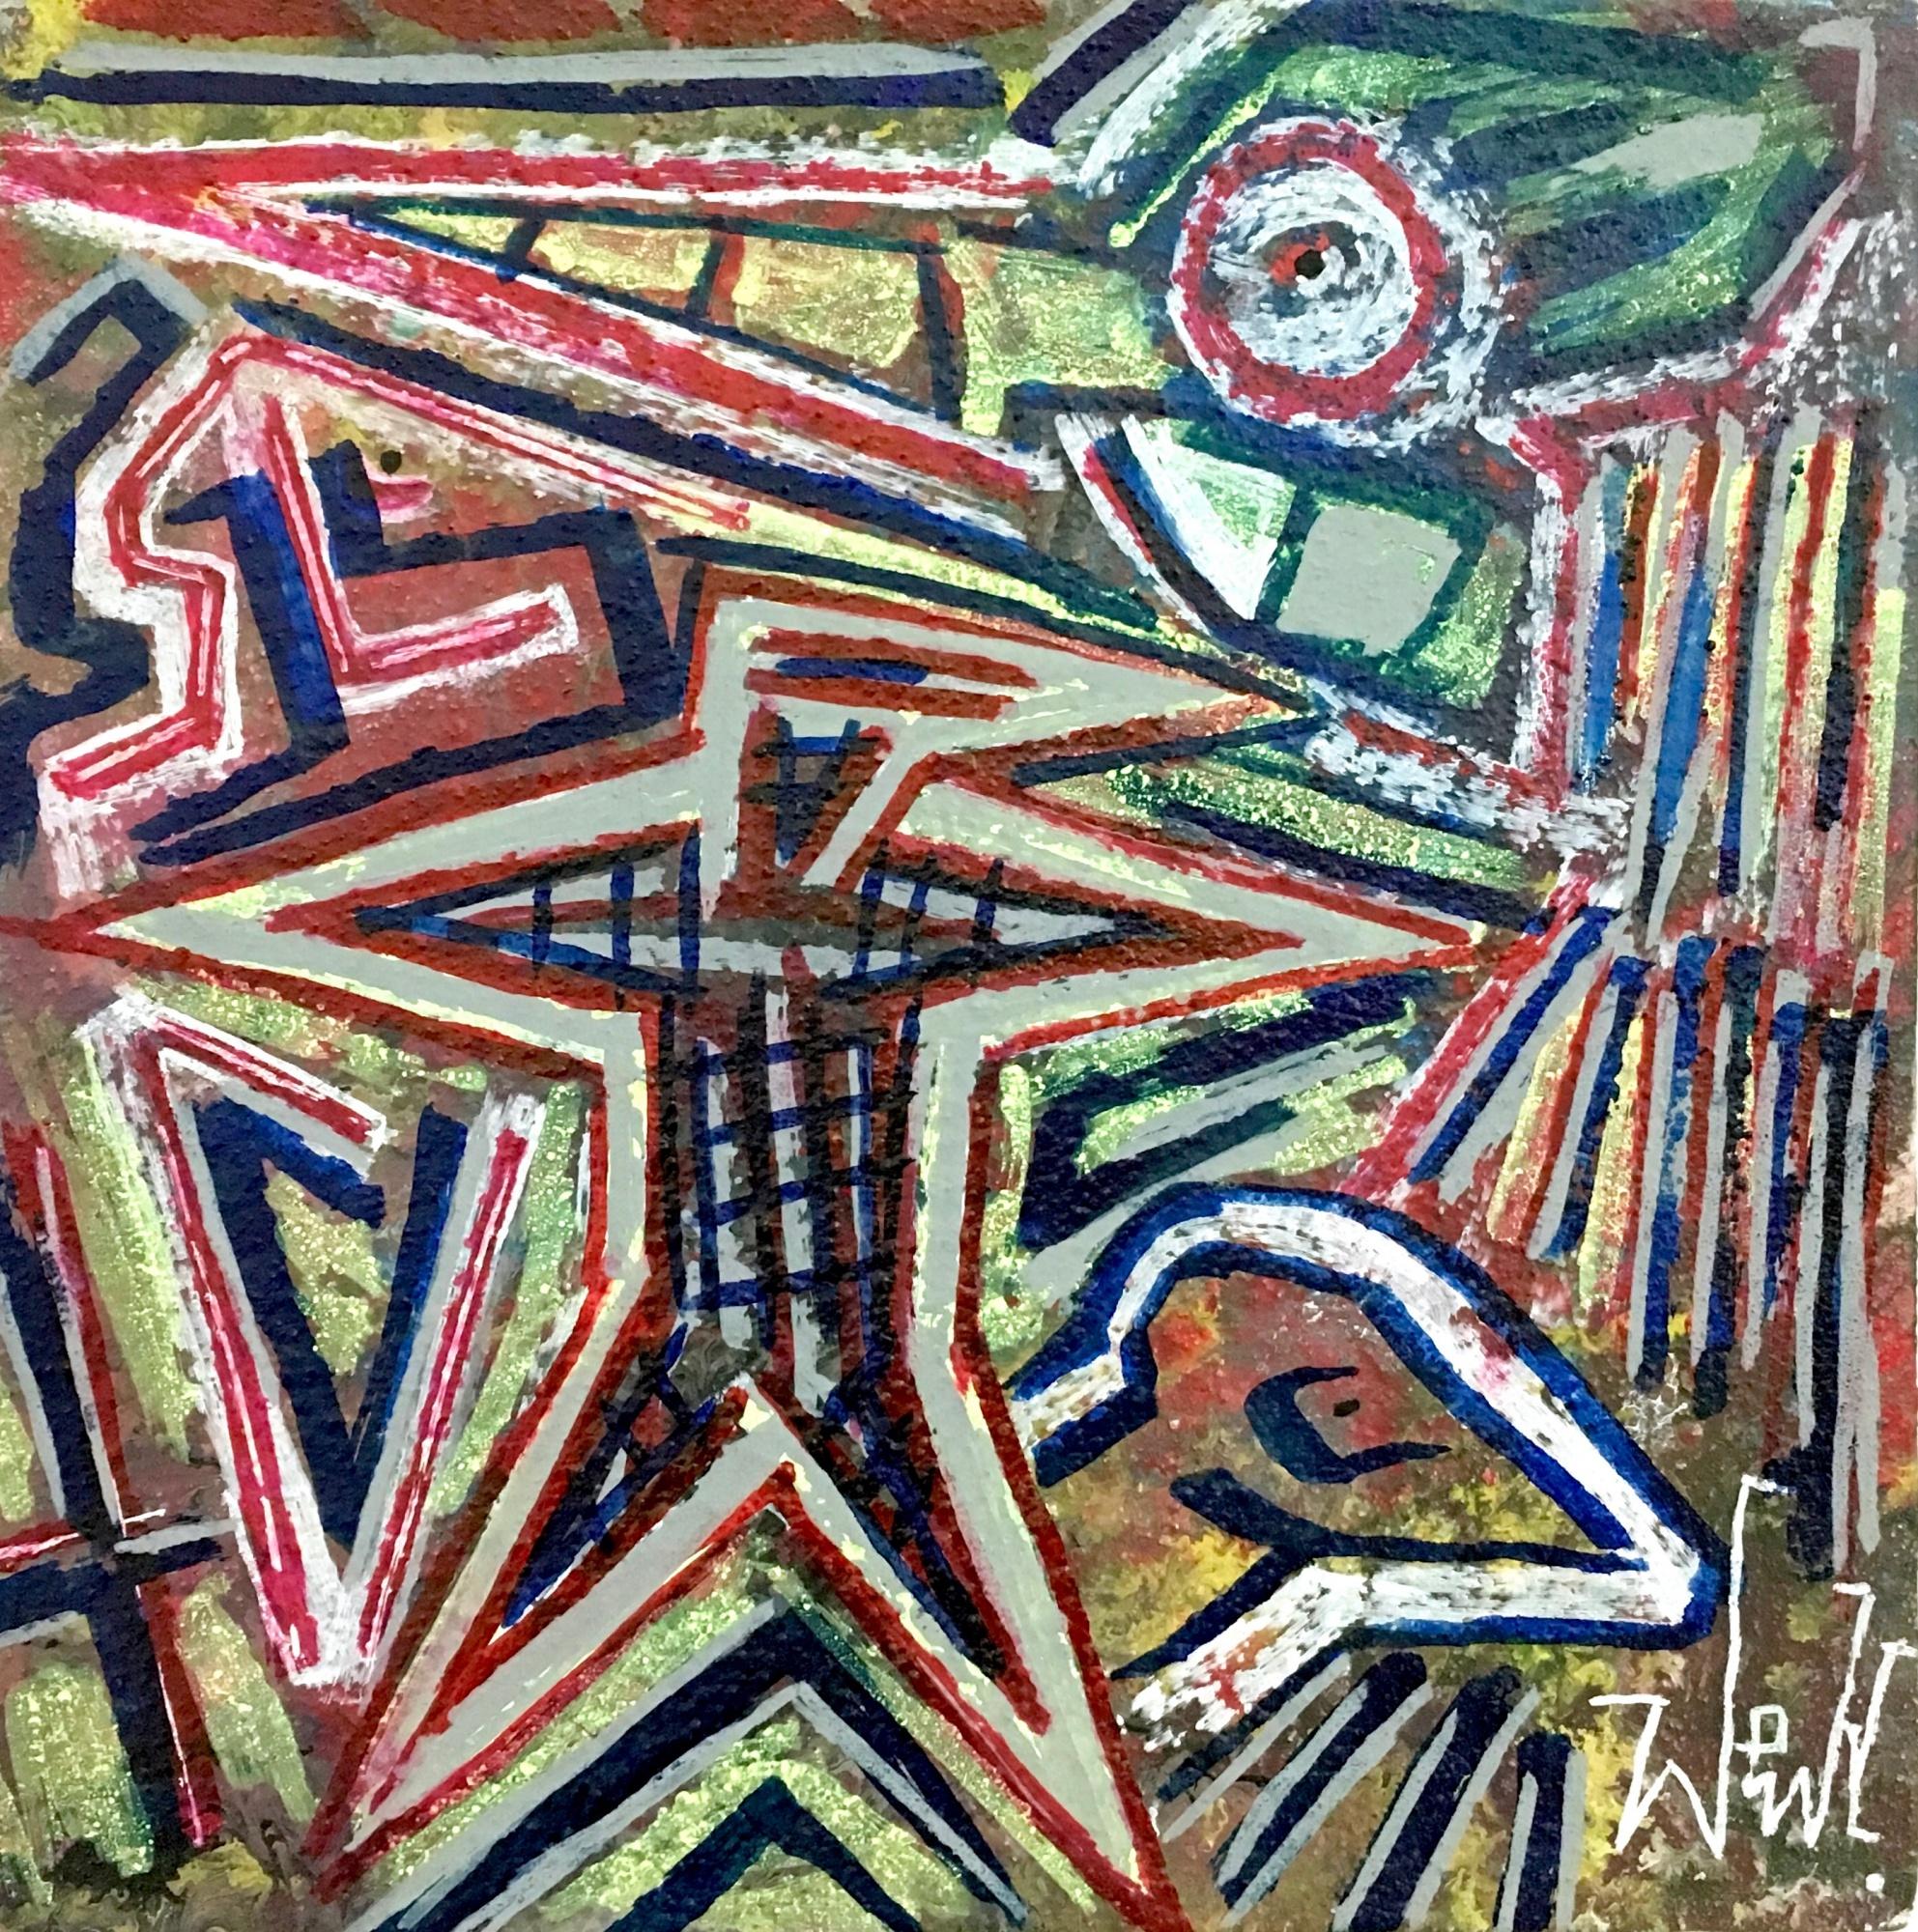 40 x 40 cm 

Translated title: " Amulets " 

Acrylic paint, oil and sand on canvas.

The artist sells the handmade, original and one-of-a-kind piece, but he reserves the right to duplicate it in multiples or digital prints, following the modality